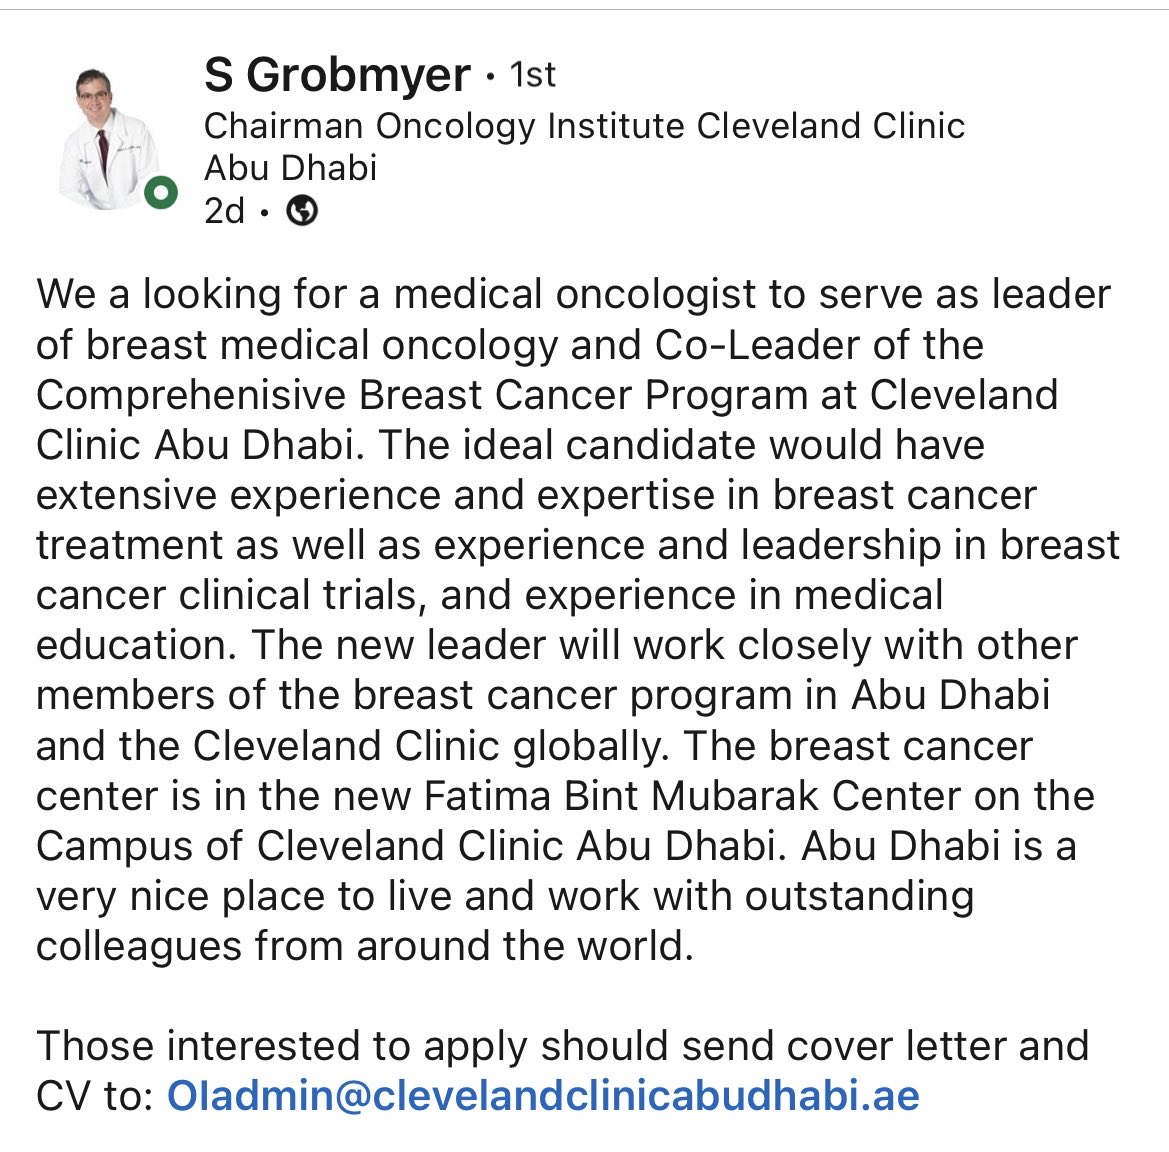 Huge opportunity to be a leader ⁦@ClevelandClinic⁩ ⁦@CCAD⁩ ⁦@grobmys⁩ is looking for a #breastcancer medical oncologist with research and leadership experience!